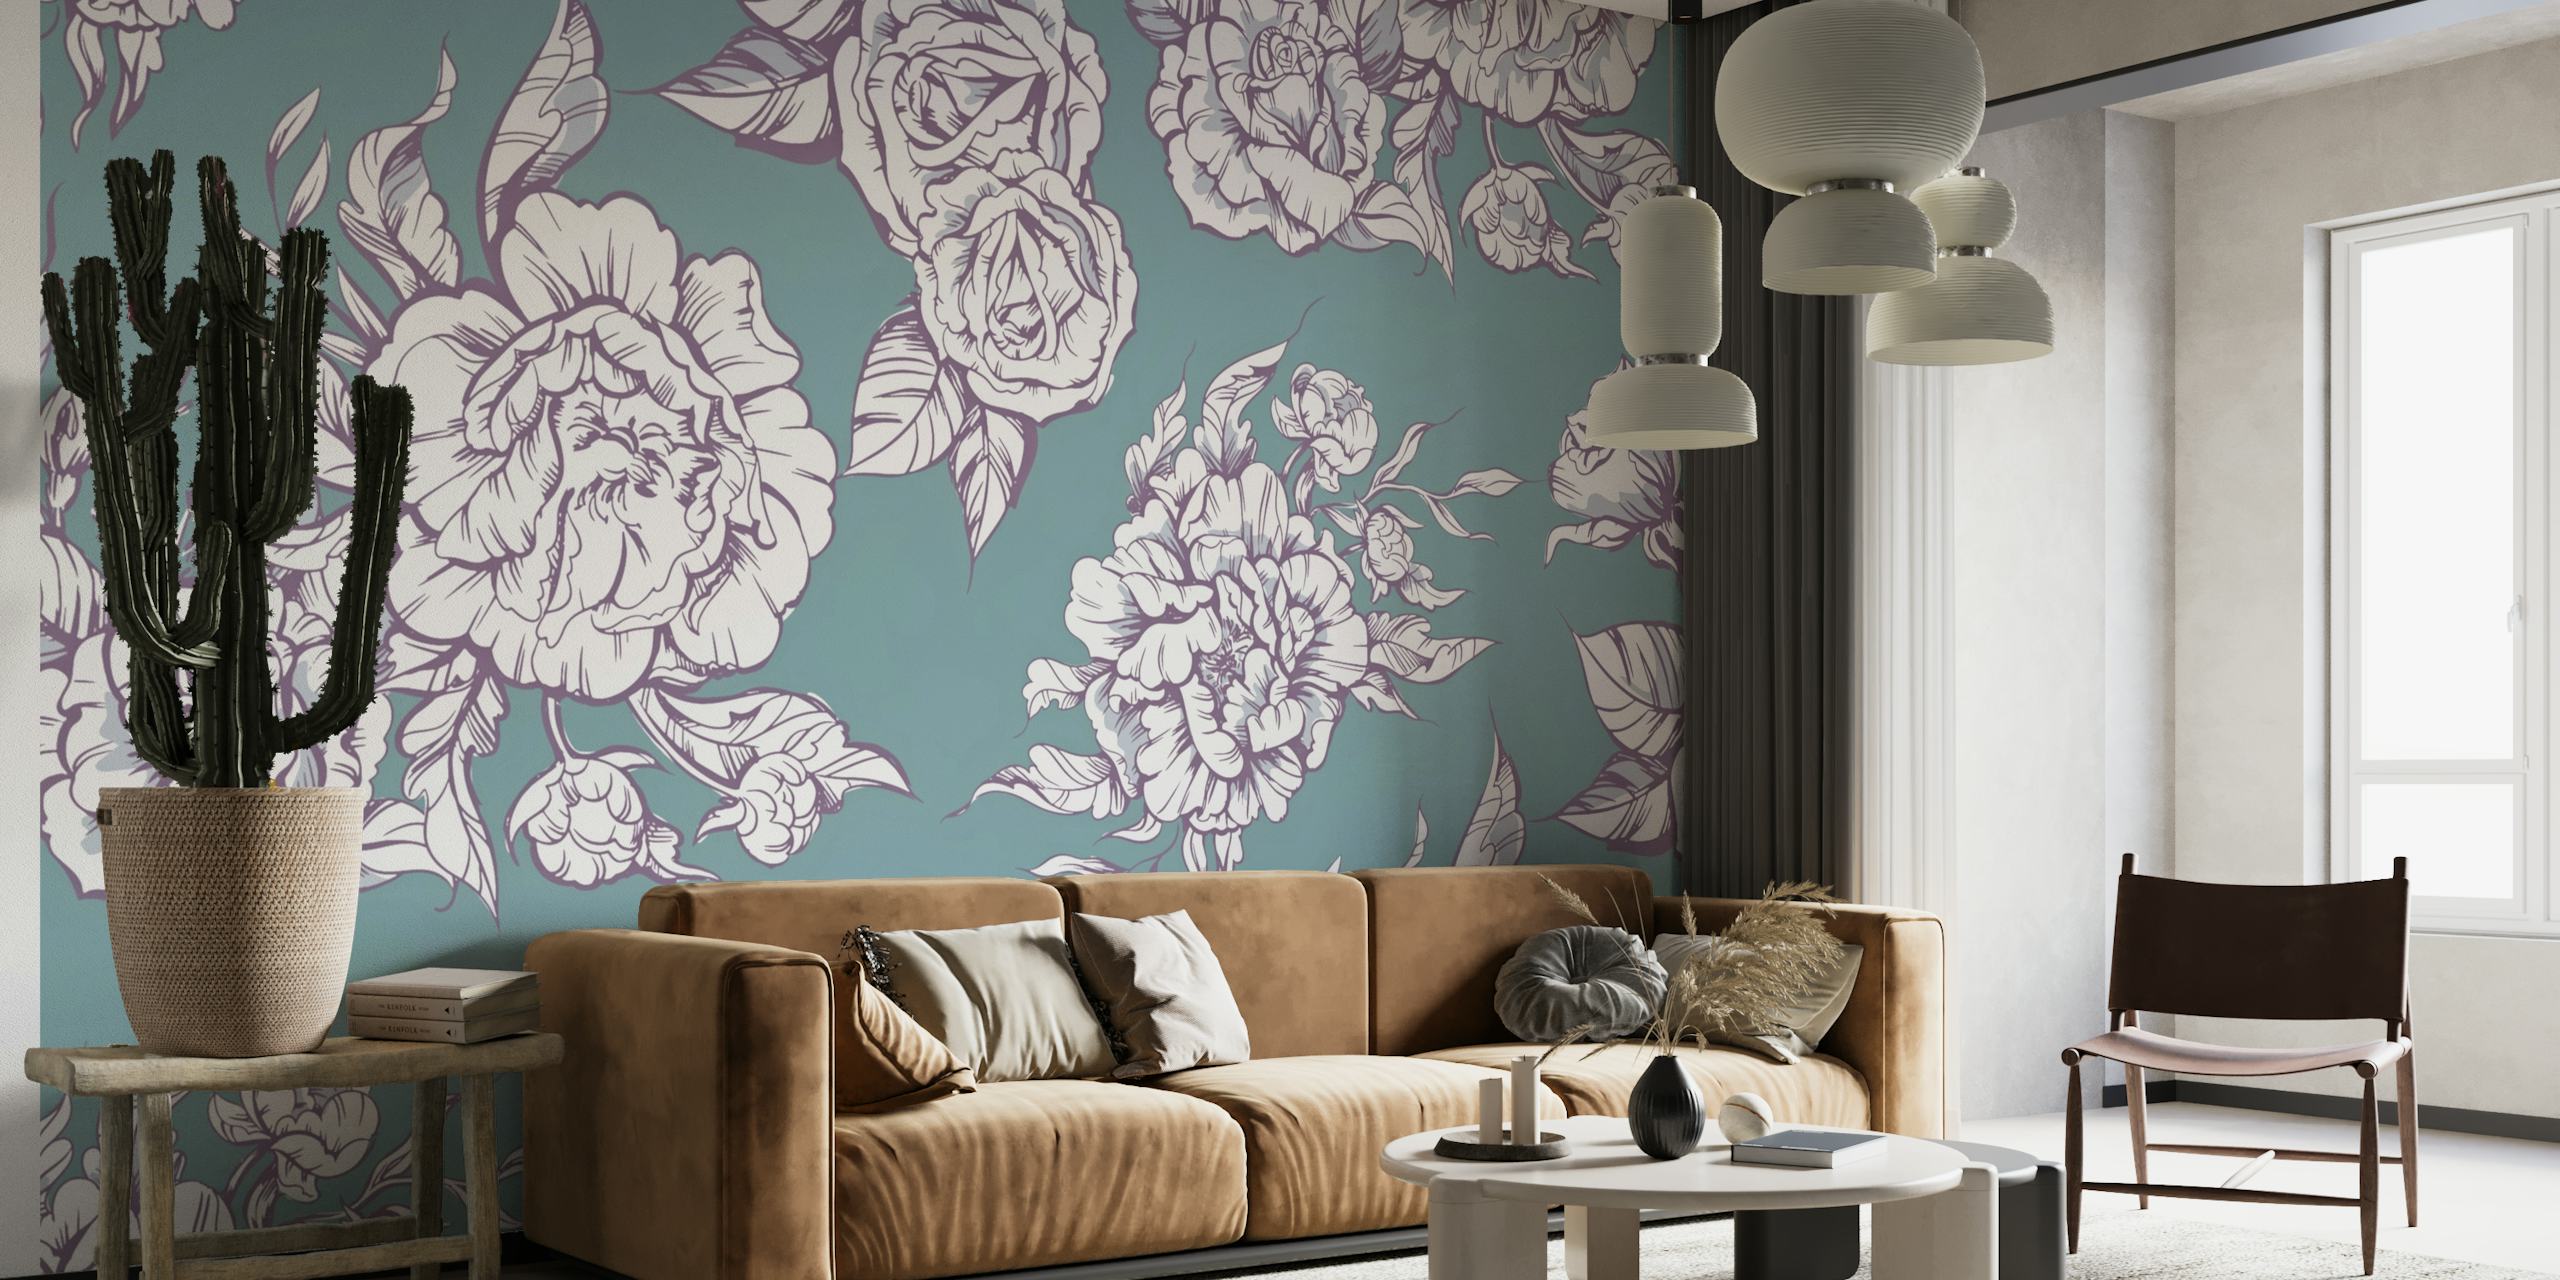 Elegant peonies wall mural with a teal background